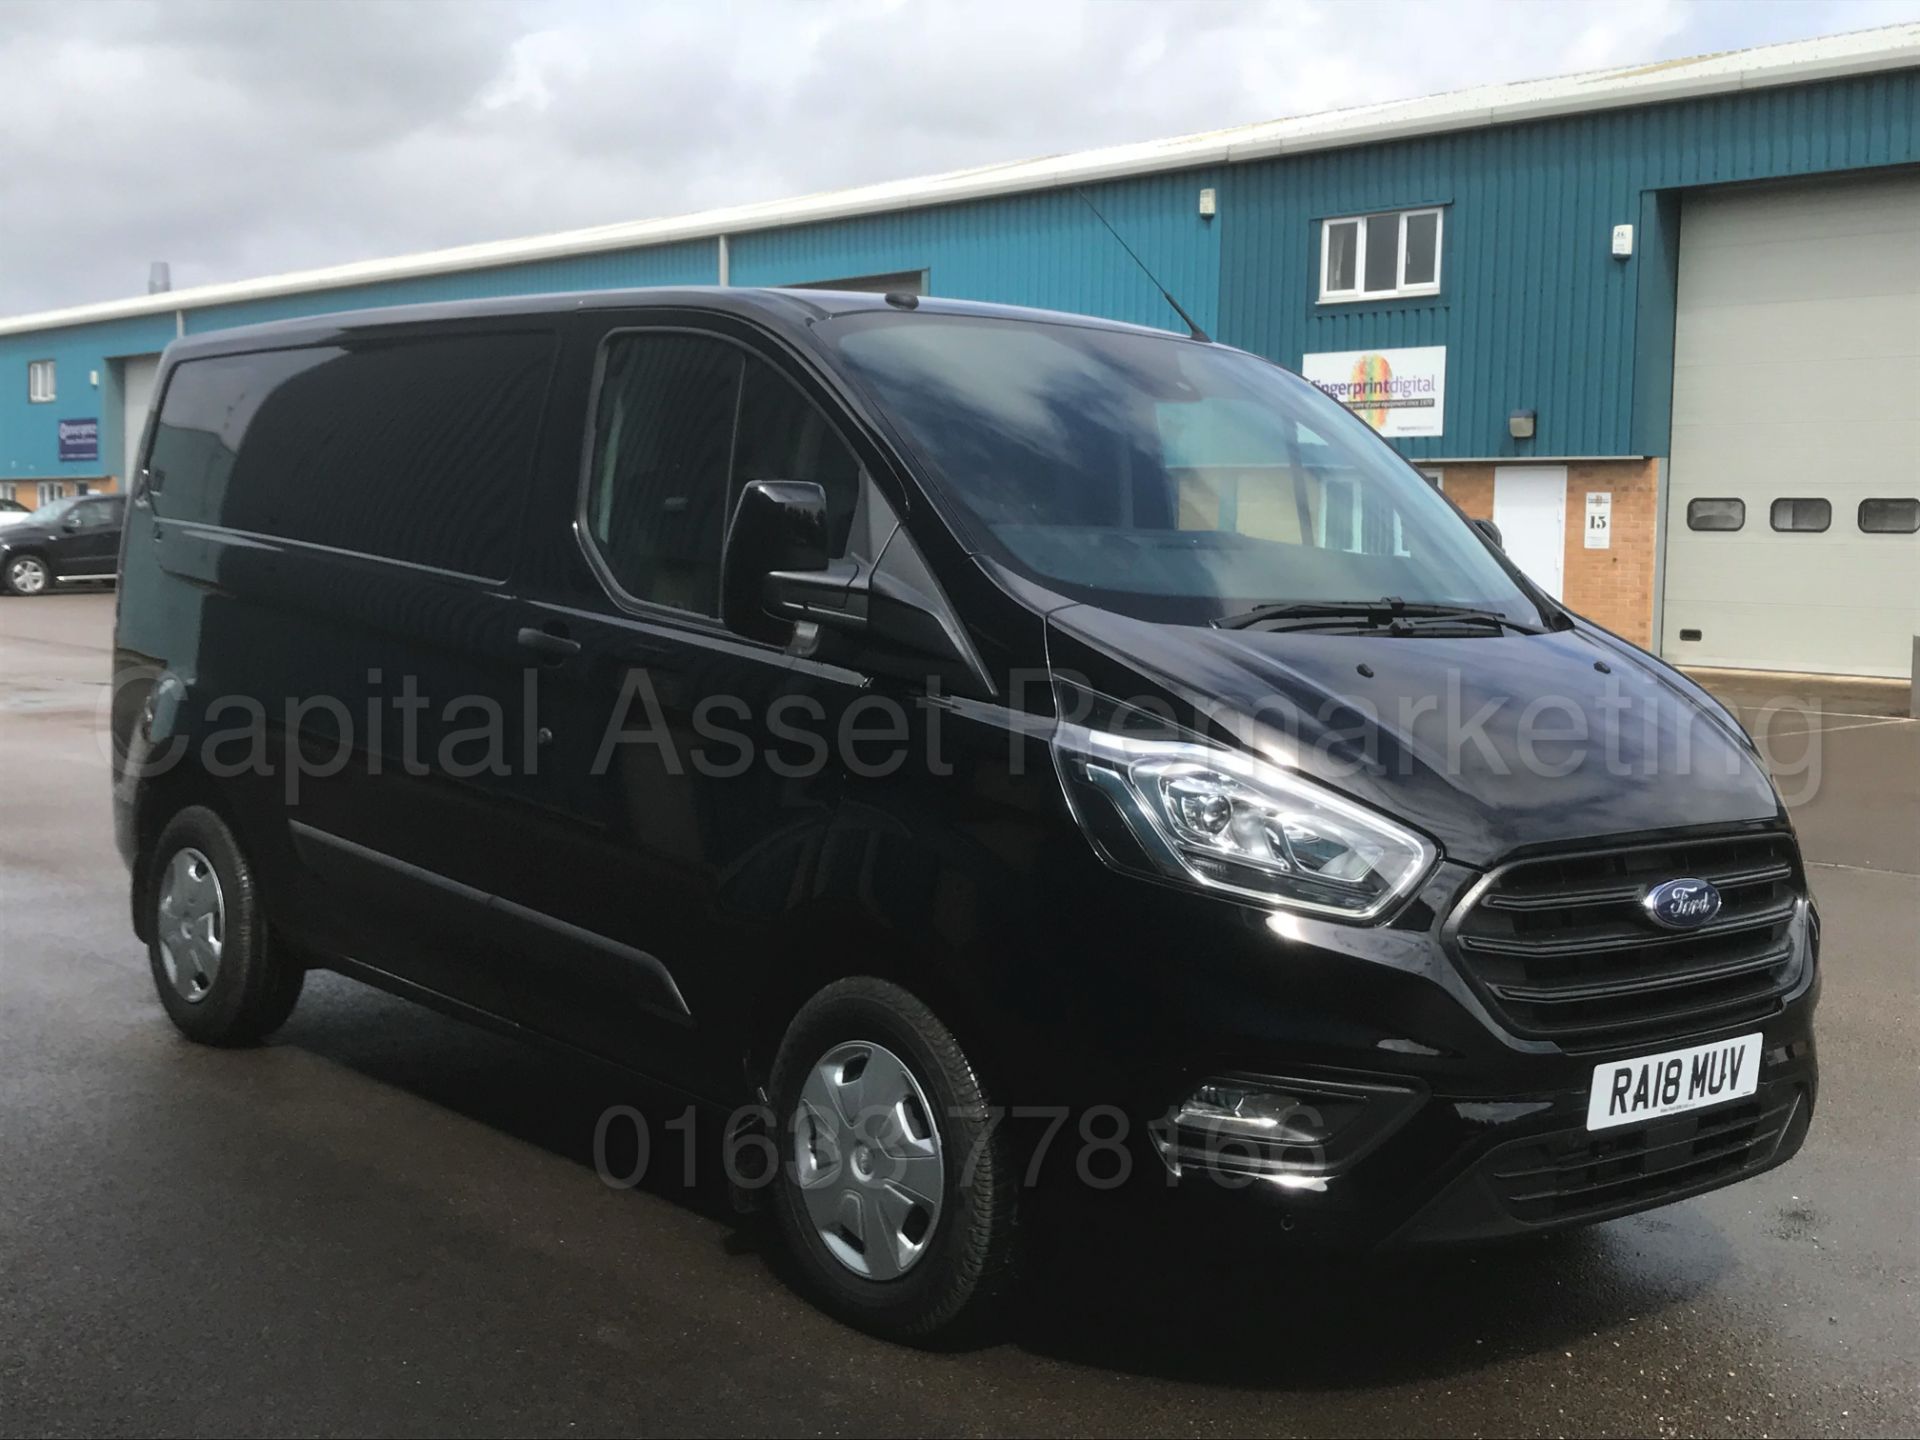 FORD TRANSIT CUSTOM *TREND EDITION* (2018 - ALL NEW MODEL) '2.0 TDCI - 6 SPEED' *DELIVERY MILEAGE*